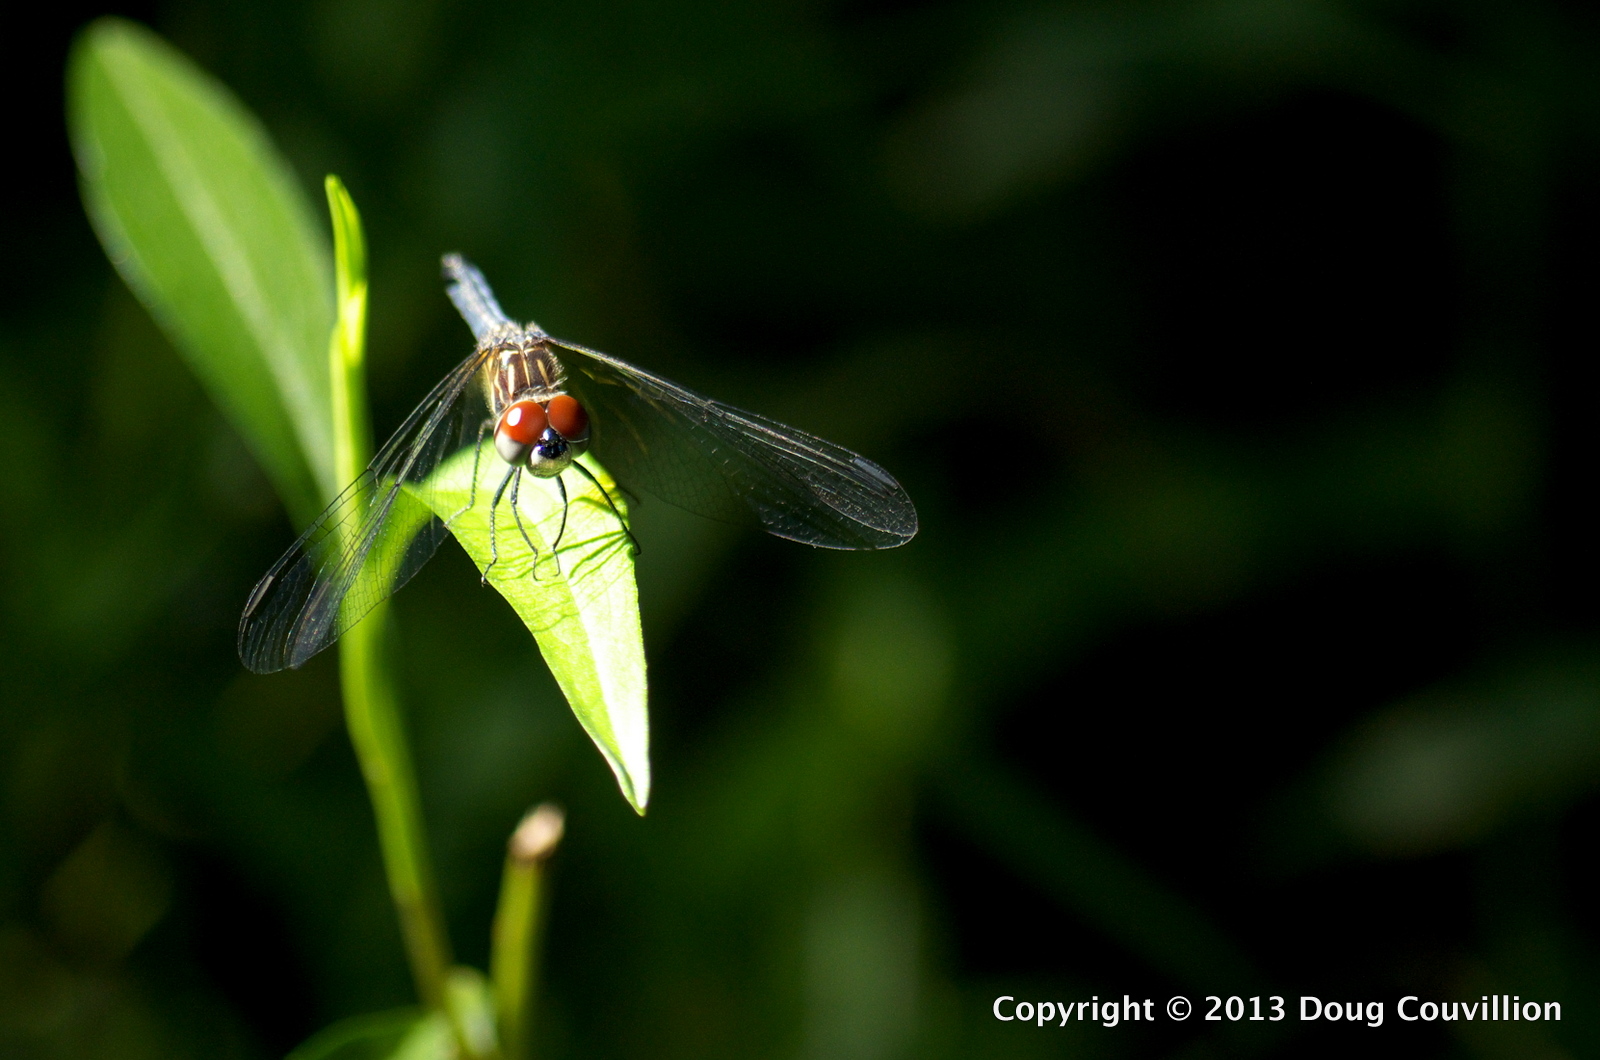 photograph of a dragonfly with bright red eyes resting on a green leaf